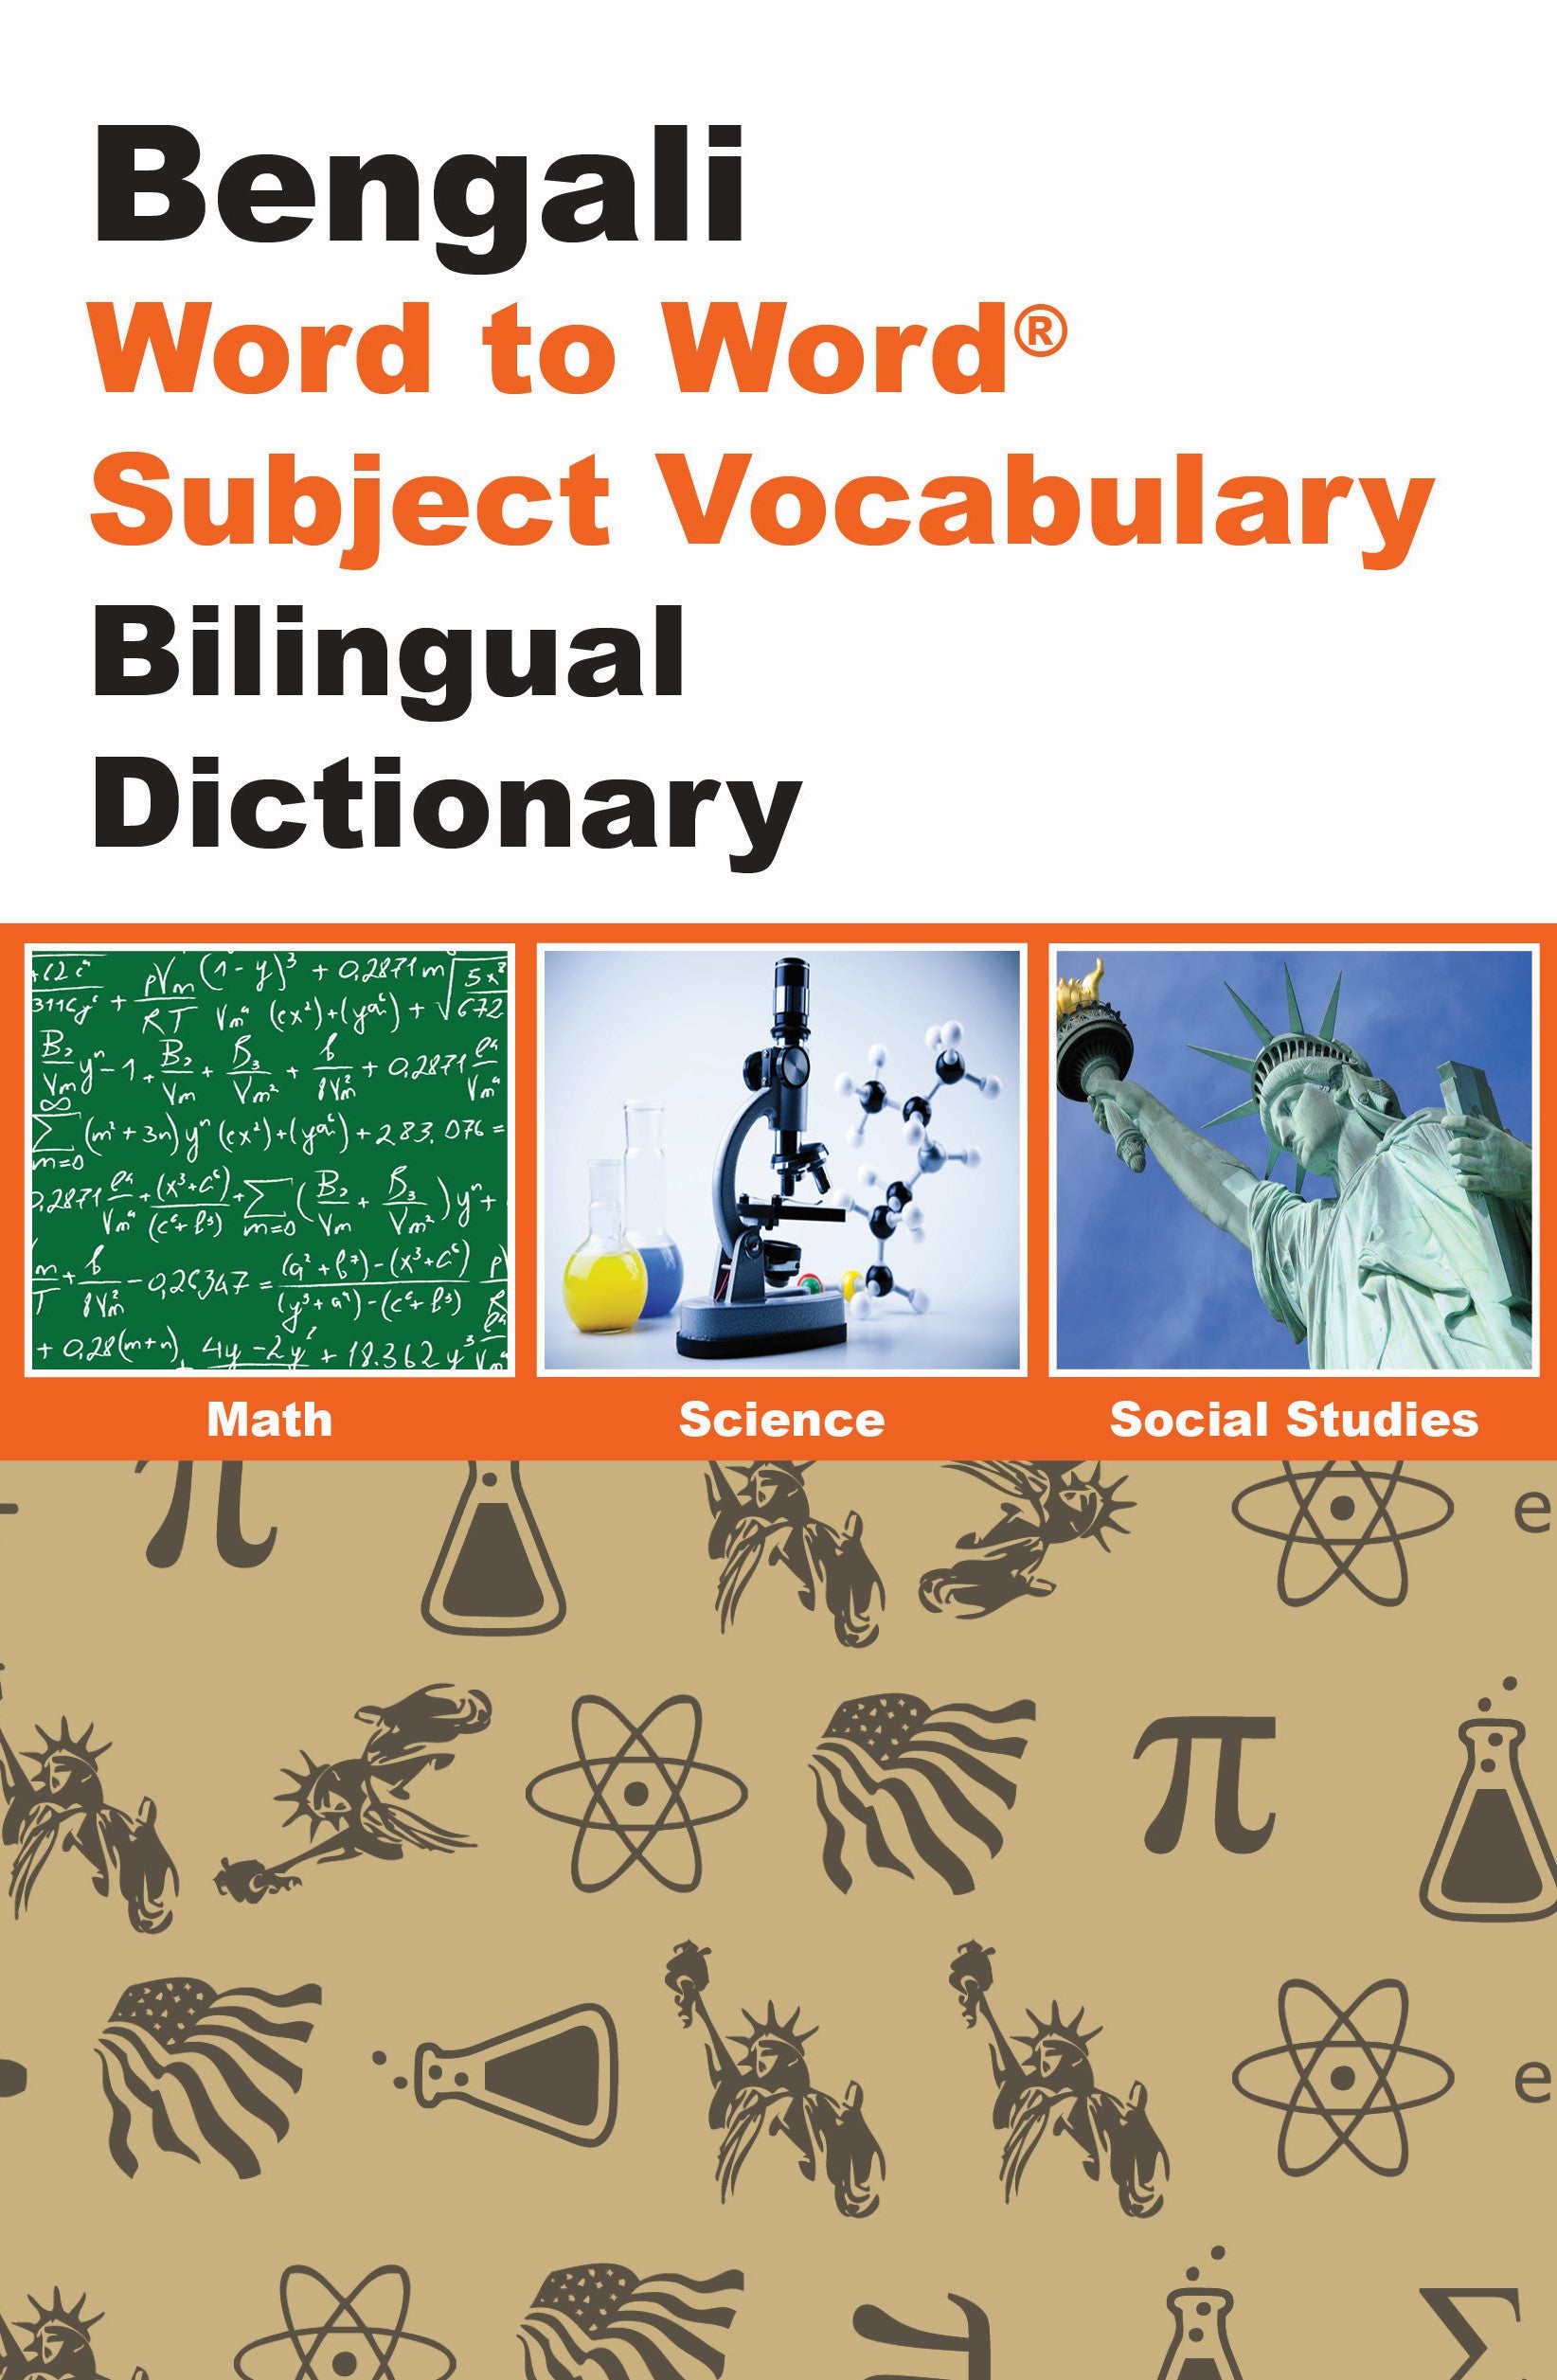 Bengali BD Word to Word® with Subject Vocab